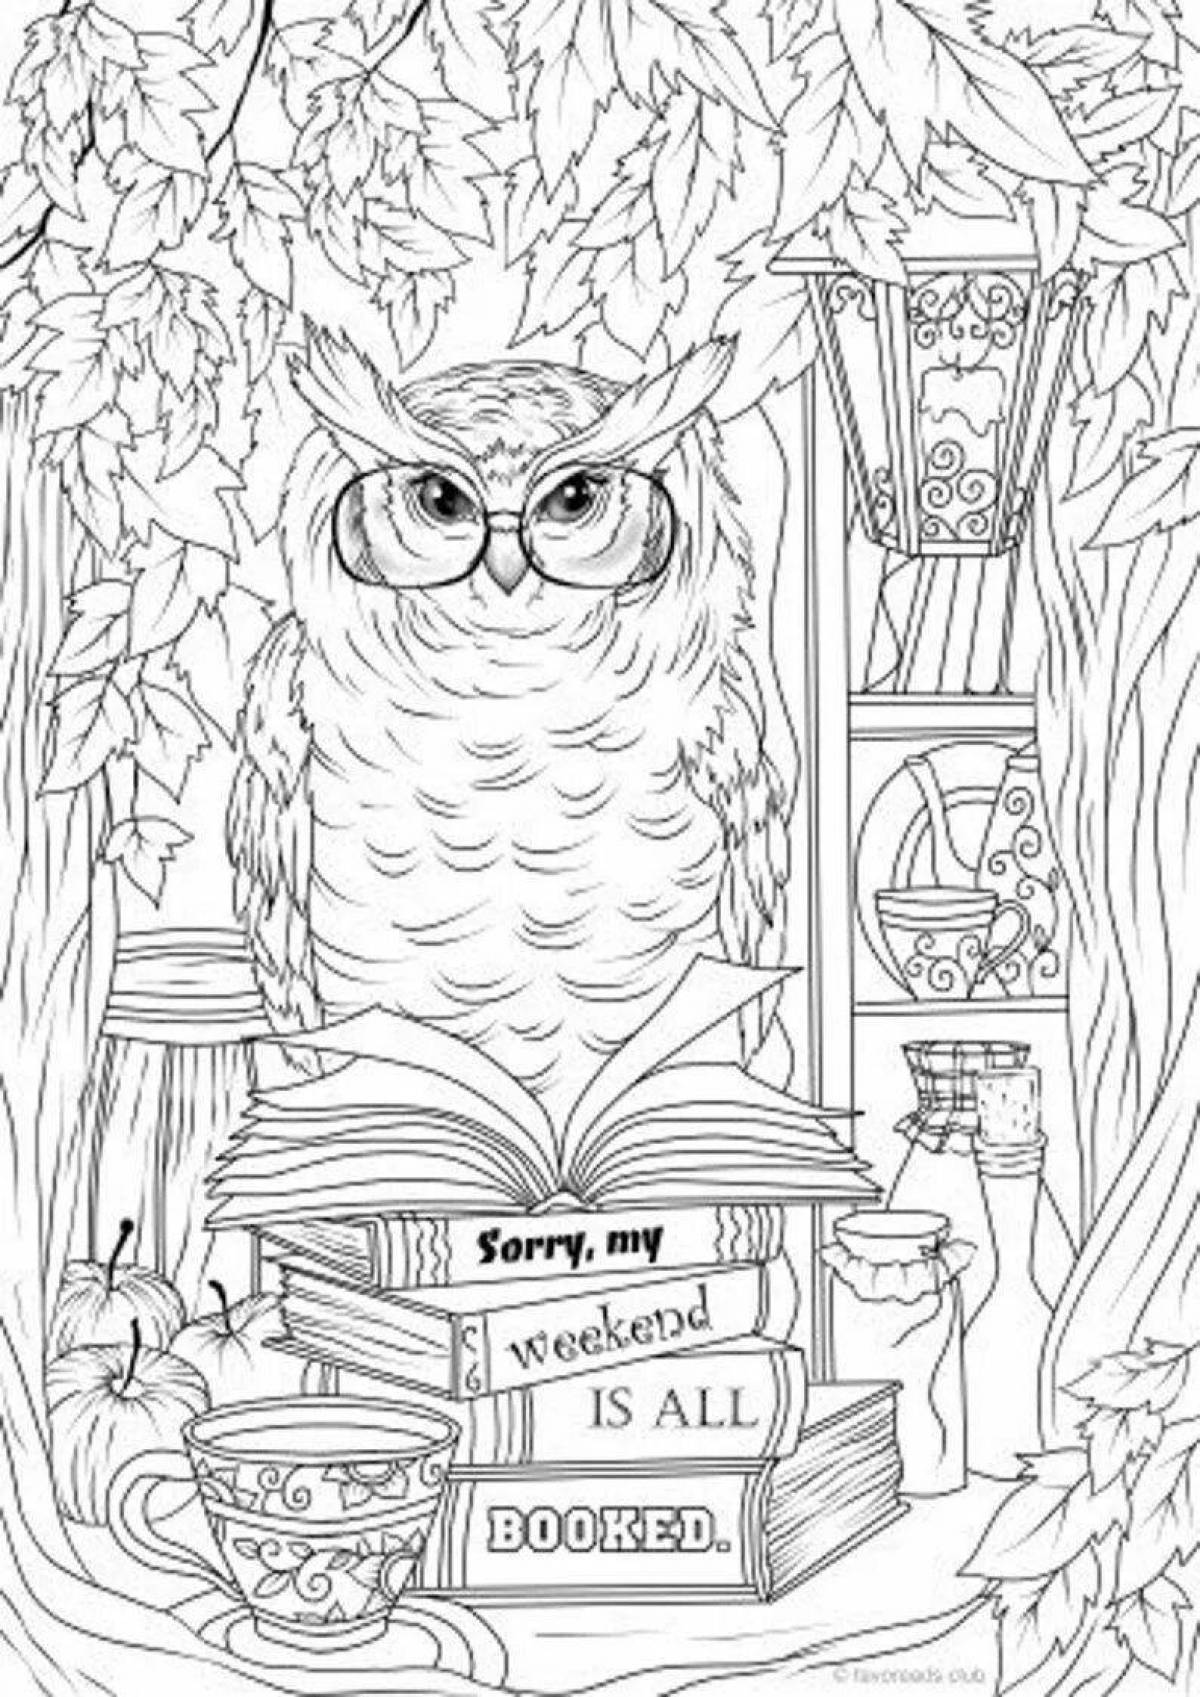 Smart owl coloring page animated